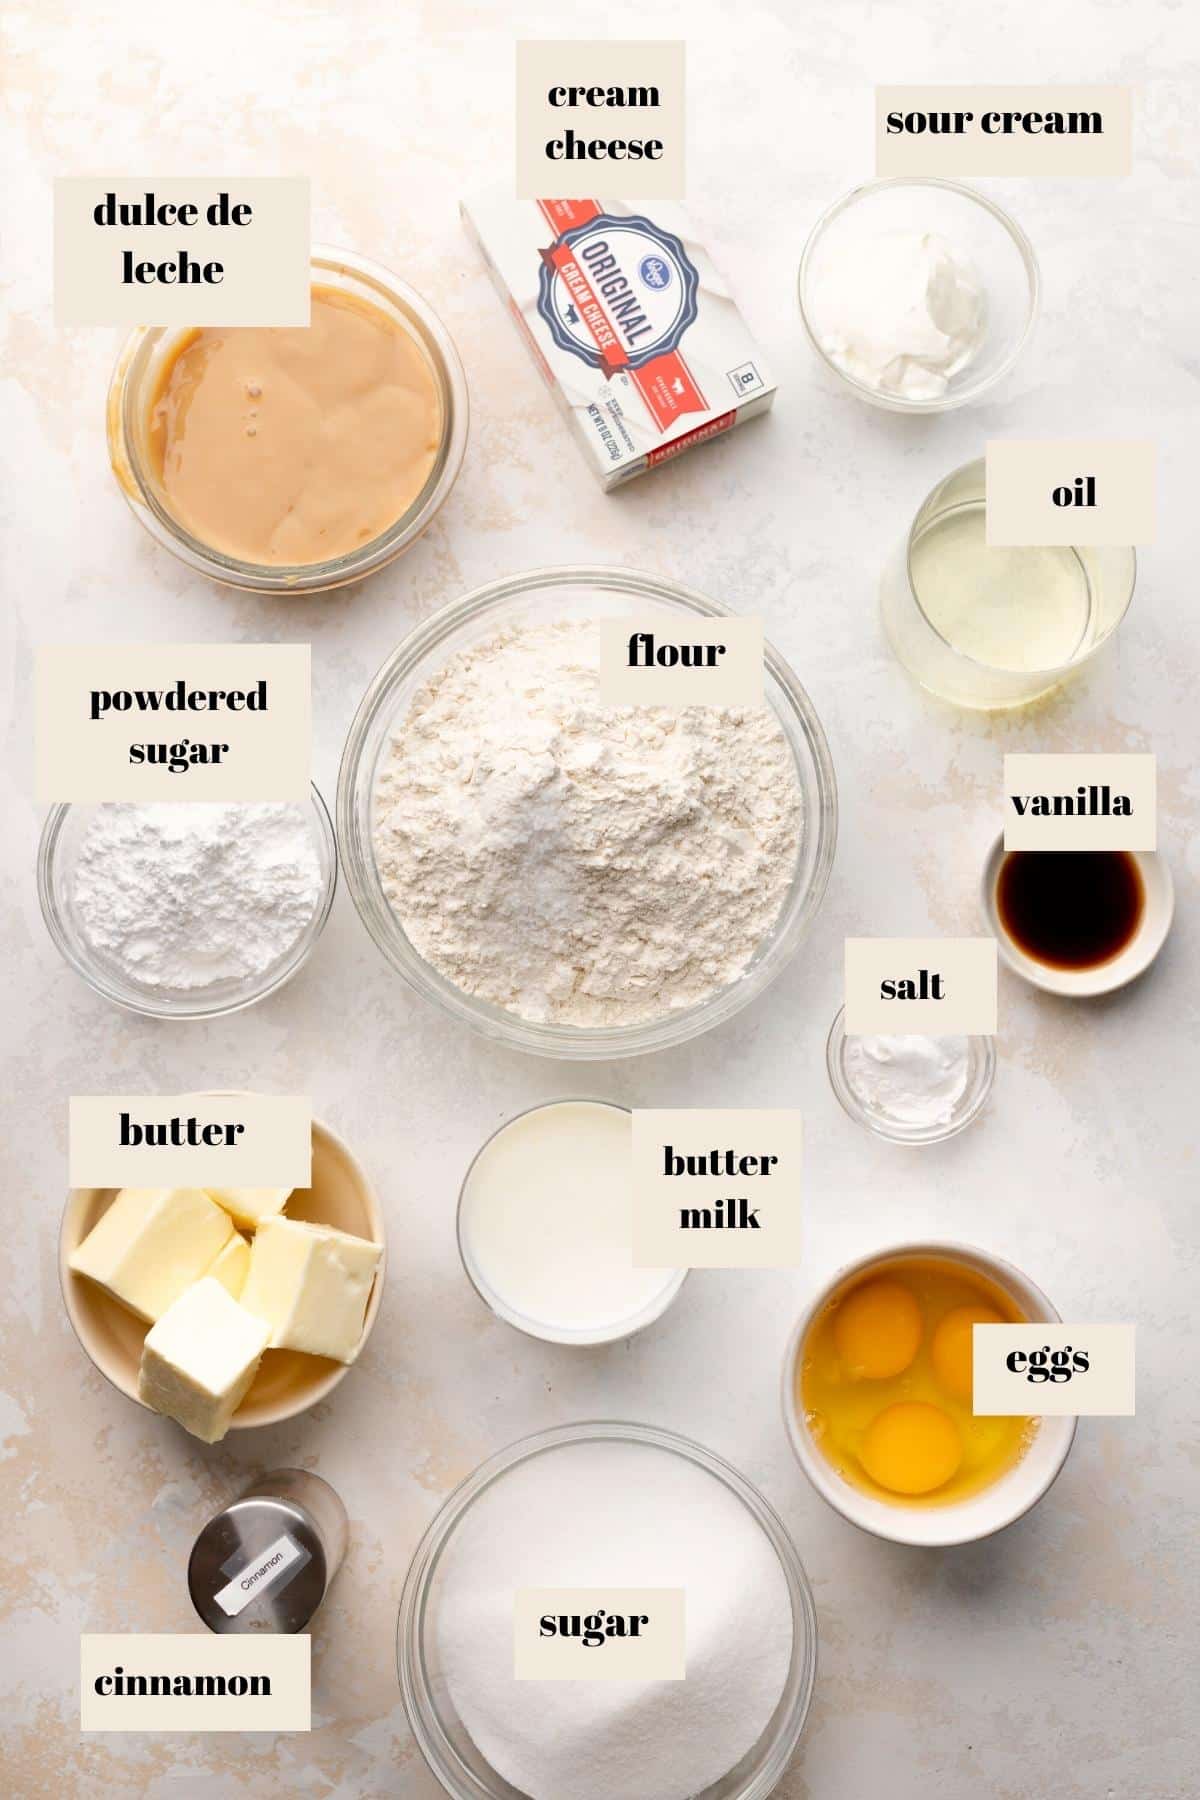 ingredients needed to make the cake.